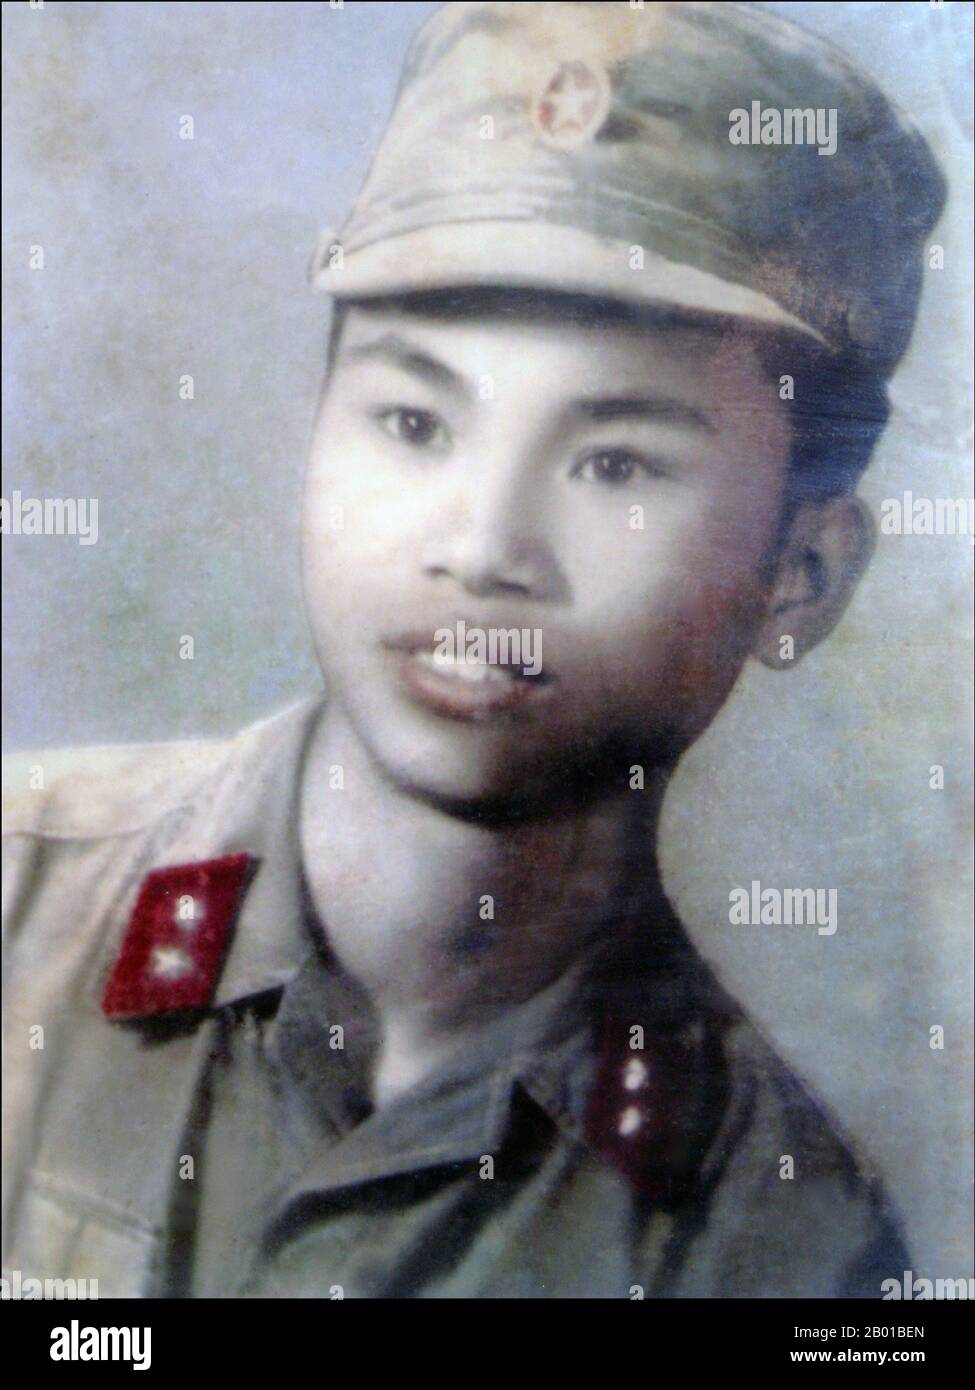 Vietnam: Memorial photograph of a young revolutionary soldier killed in or around the time of the Tet Offensive, 1968.  Cemeteries for fallen communist  'martyrs' (liệt sĩ) are to be found across Vietnam, both in the former north and south. Soldiers of the former Armed Forces of the Republic of Vietnam (South Vietnam) or ARVN, received no such posthumous honours. Stock Photo